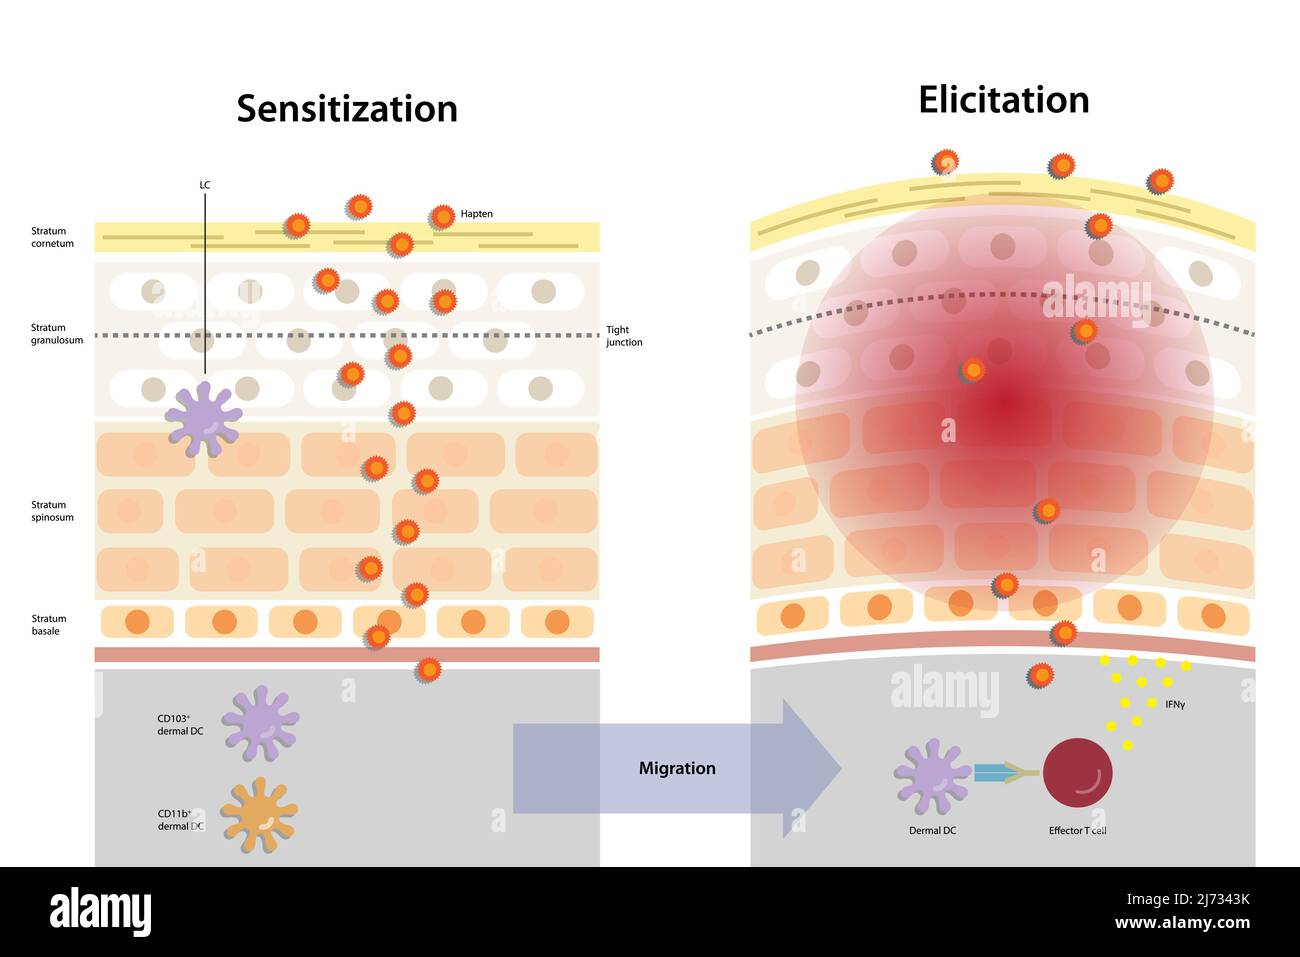 Sensitization and elicitation phases in contact allergy. Allergic contact dermatitis, contact hypersensitivity, cell–mediated inflammatory skin diseas Stock Vector